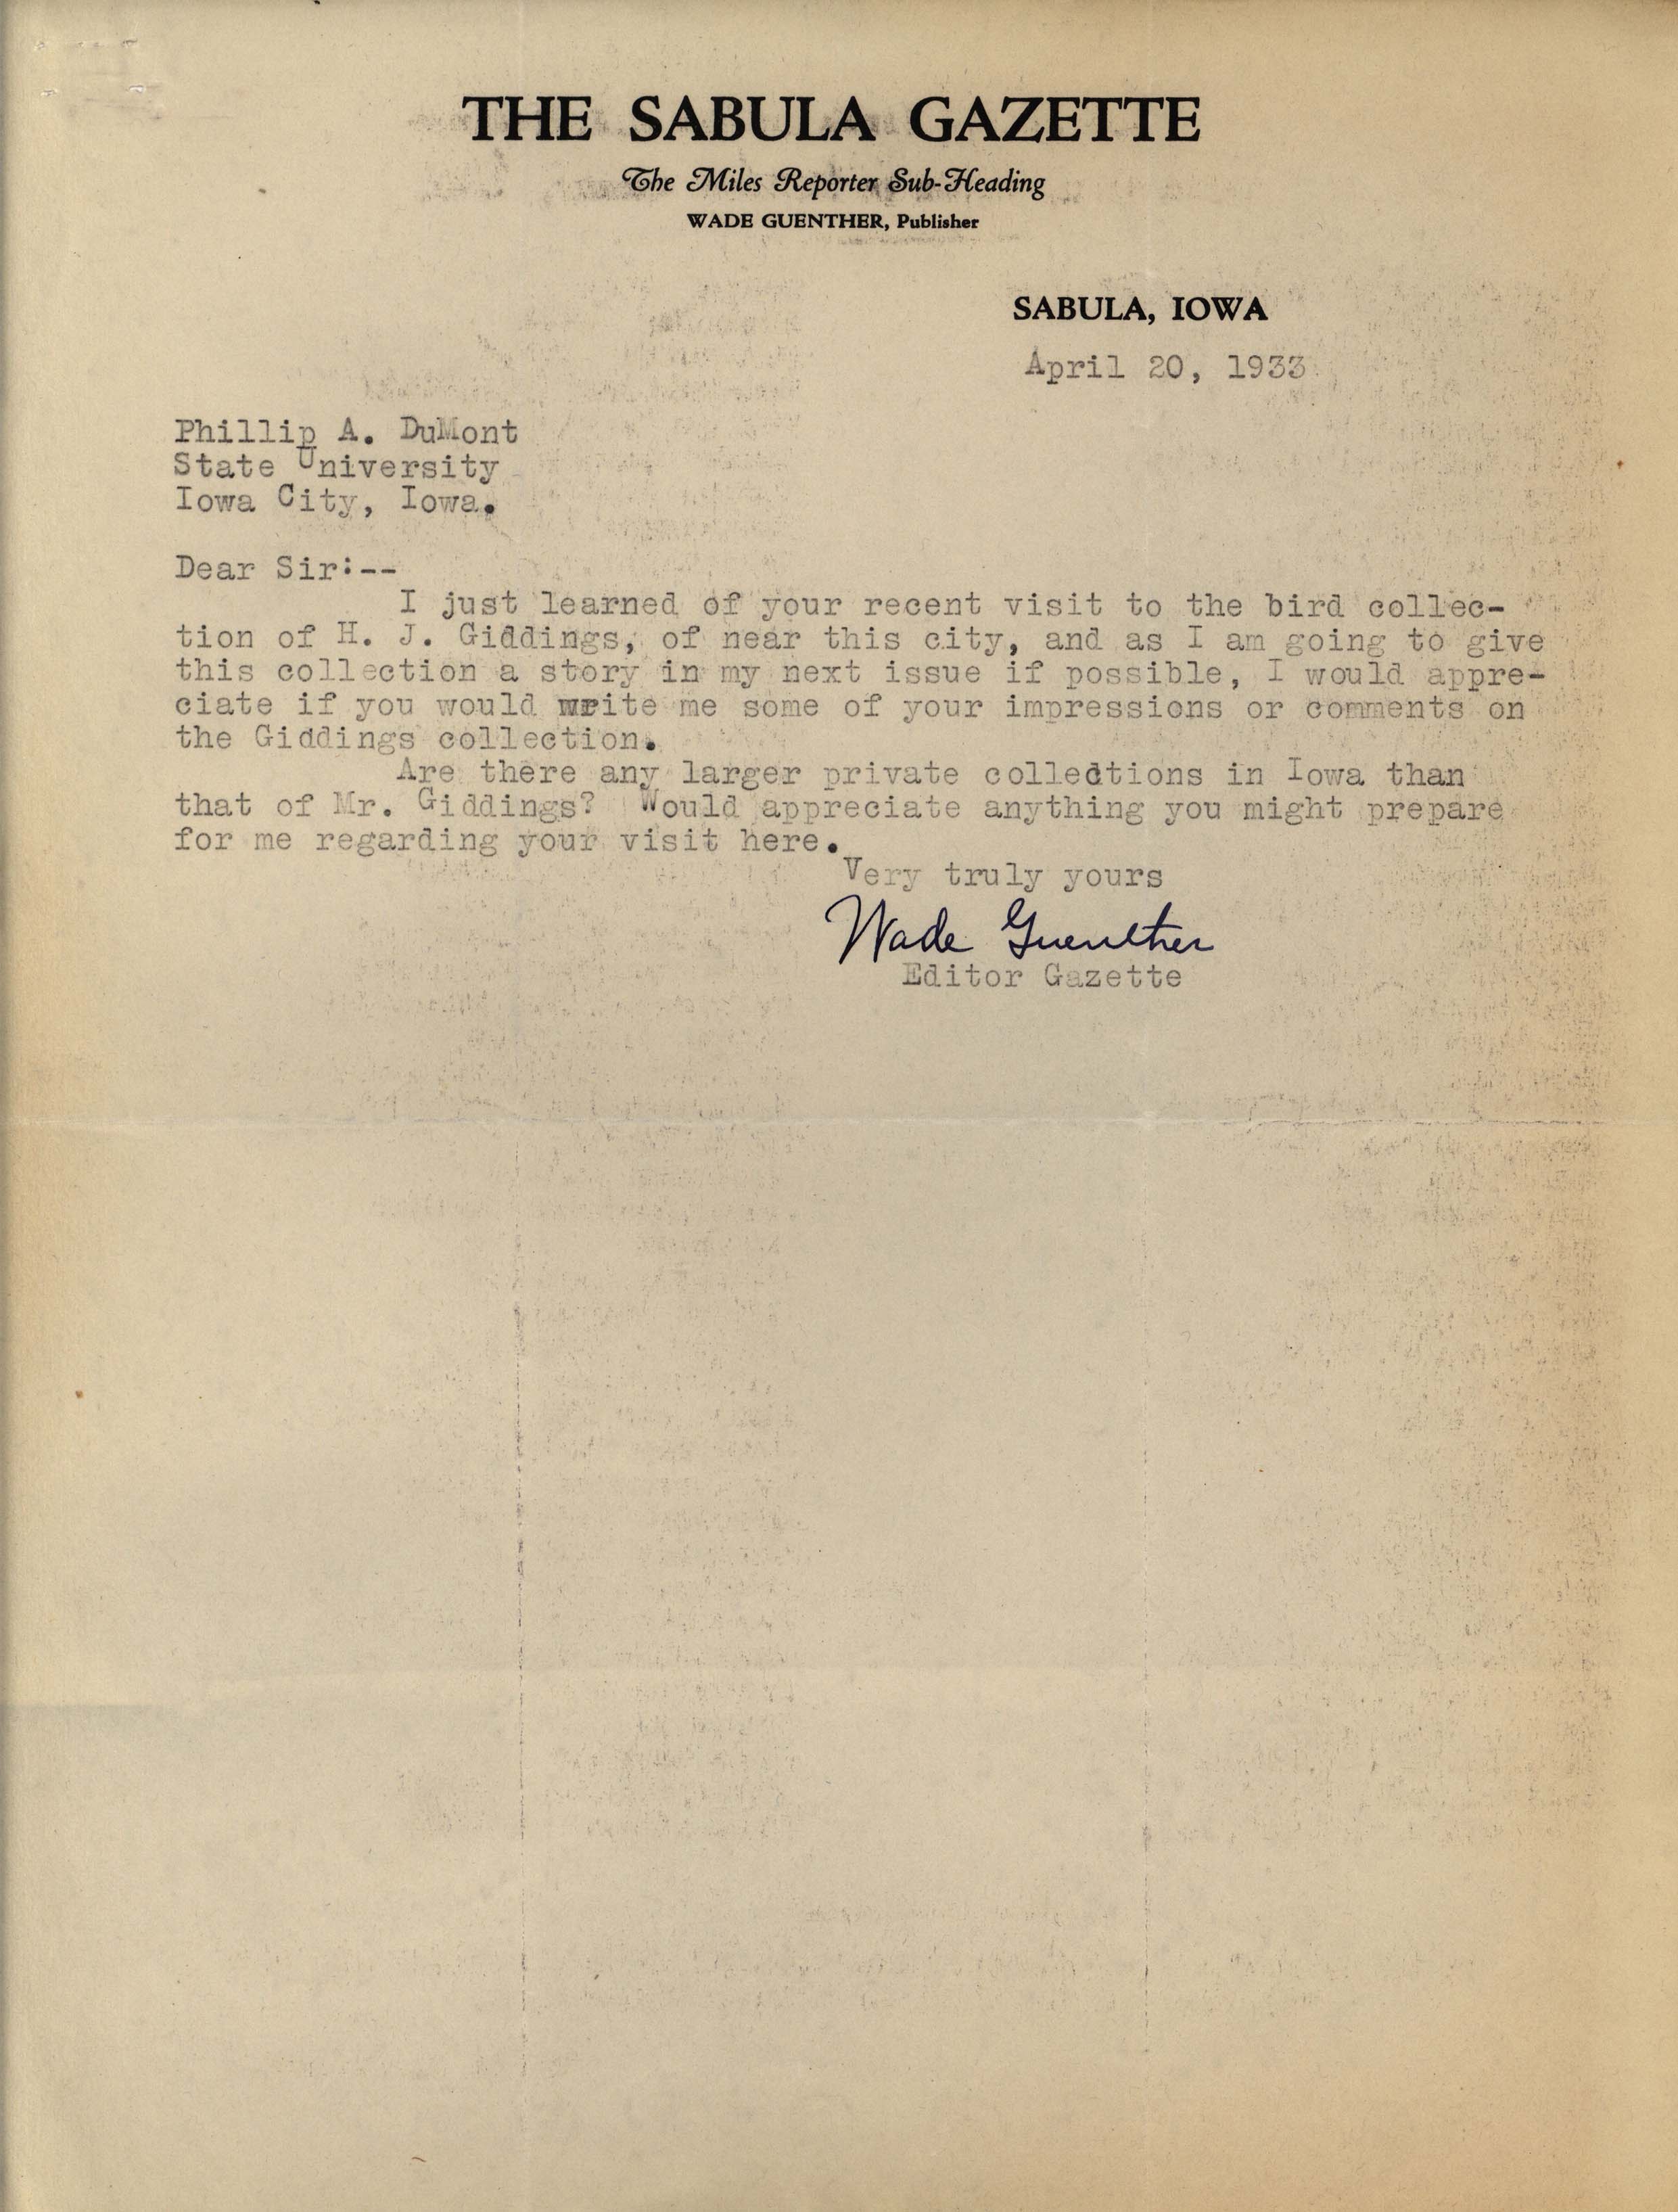 Wade Guenther letter to Philip DuMont regarding the Giddings collection, April 20, 1933